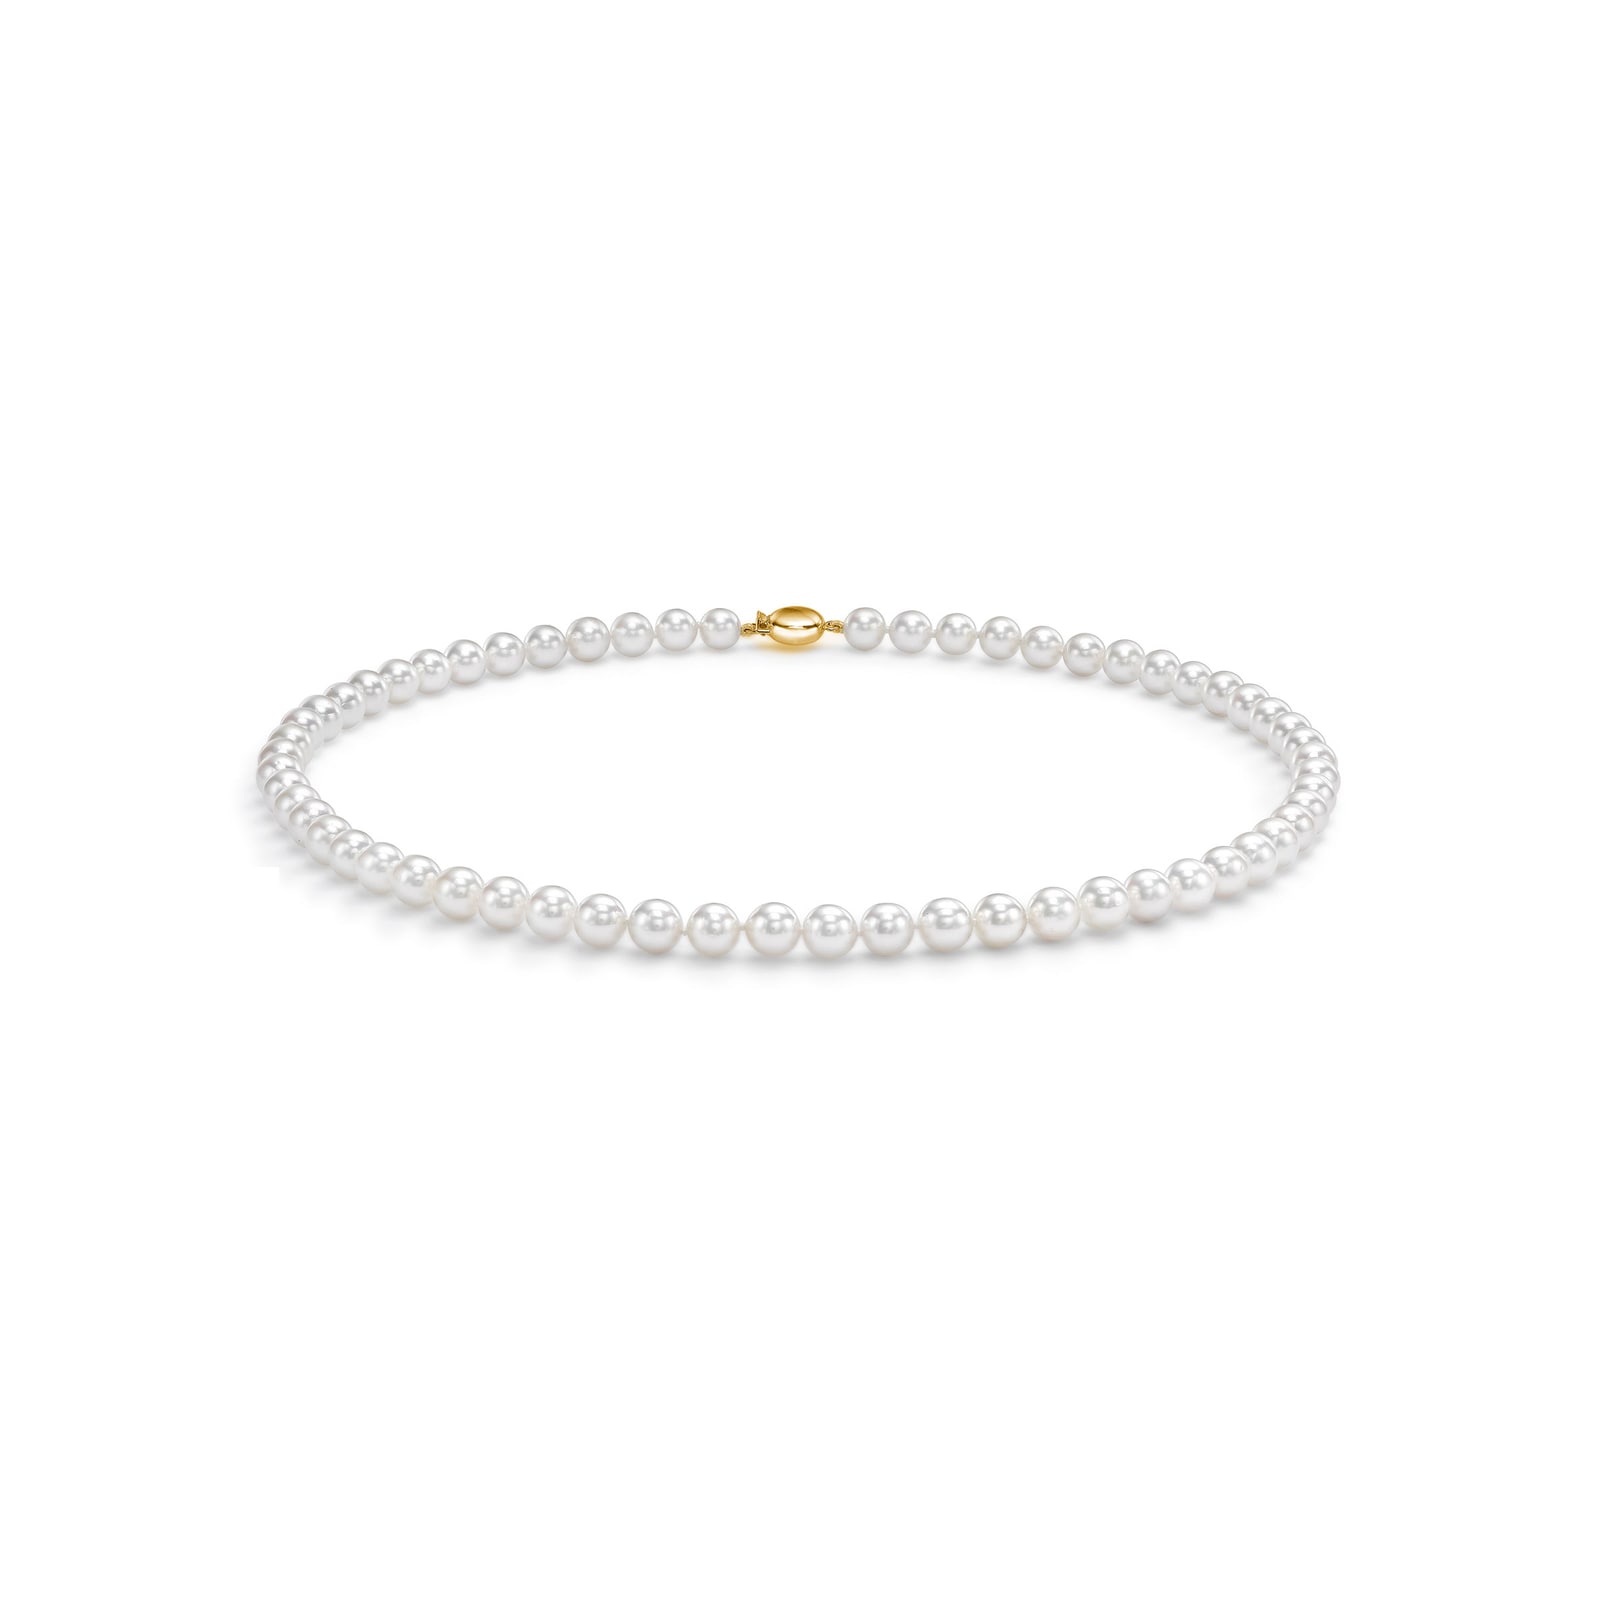 18ct Yellow Gold 5.5-6mm Akoya Pearl 16" Necklace